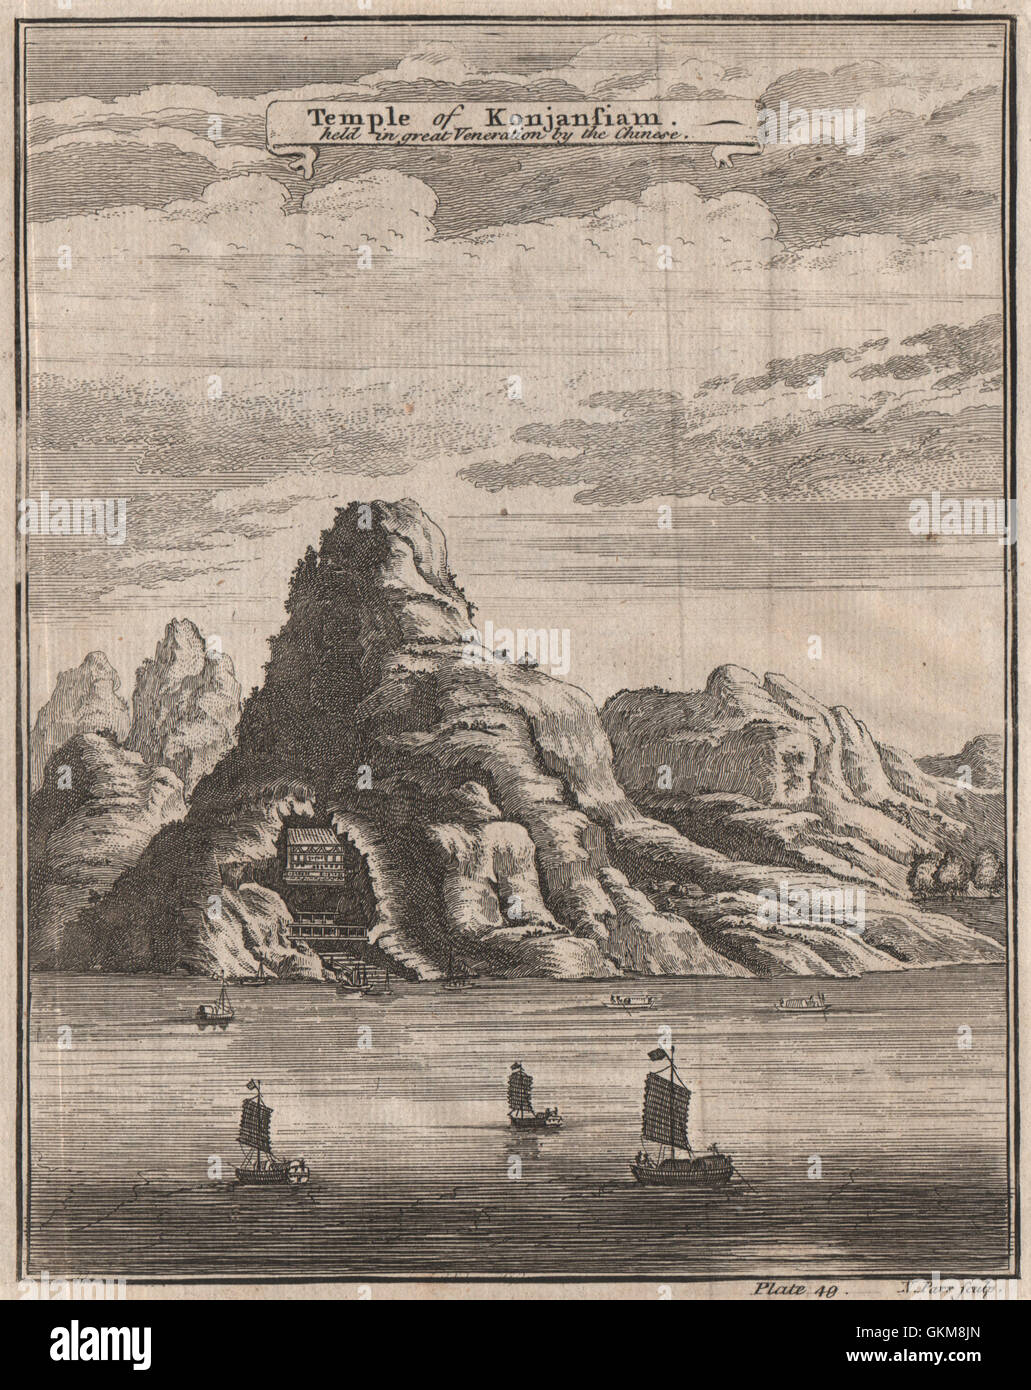 CHINA. 'Temple of Konjansiam held in great veneration by the Chinese'. PARR 1746 Stock Photo